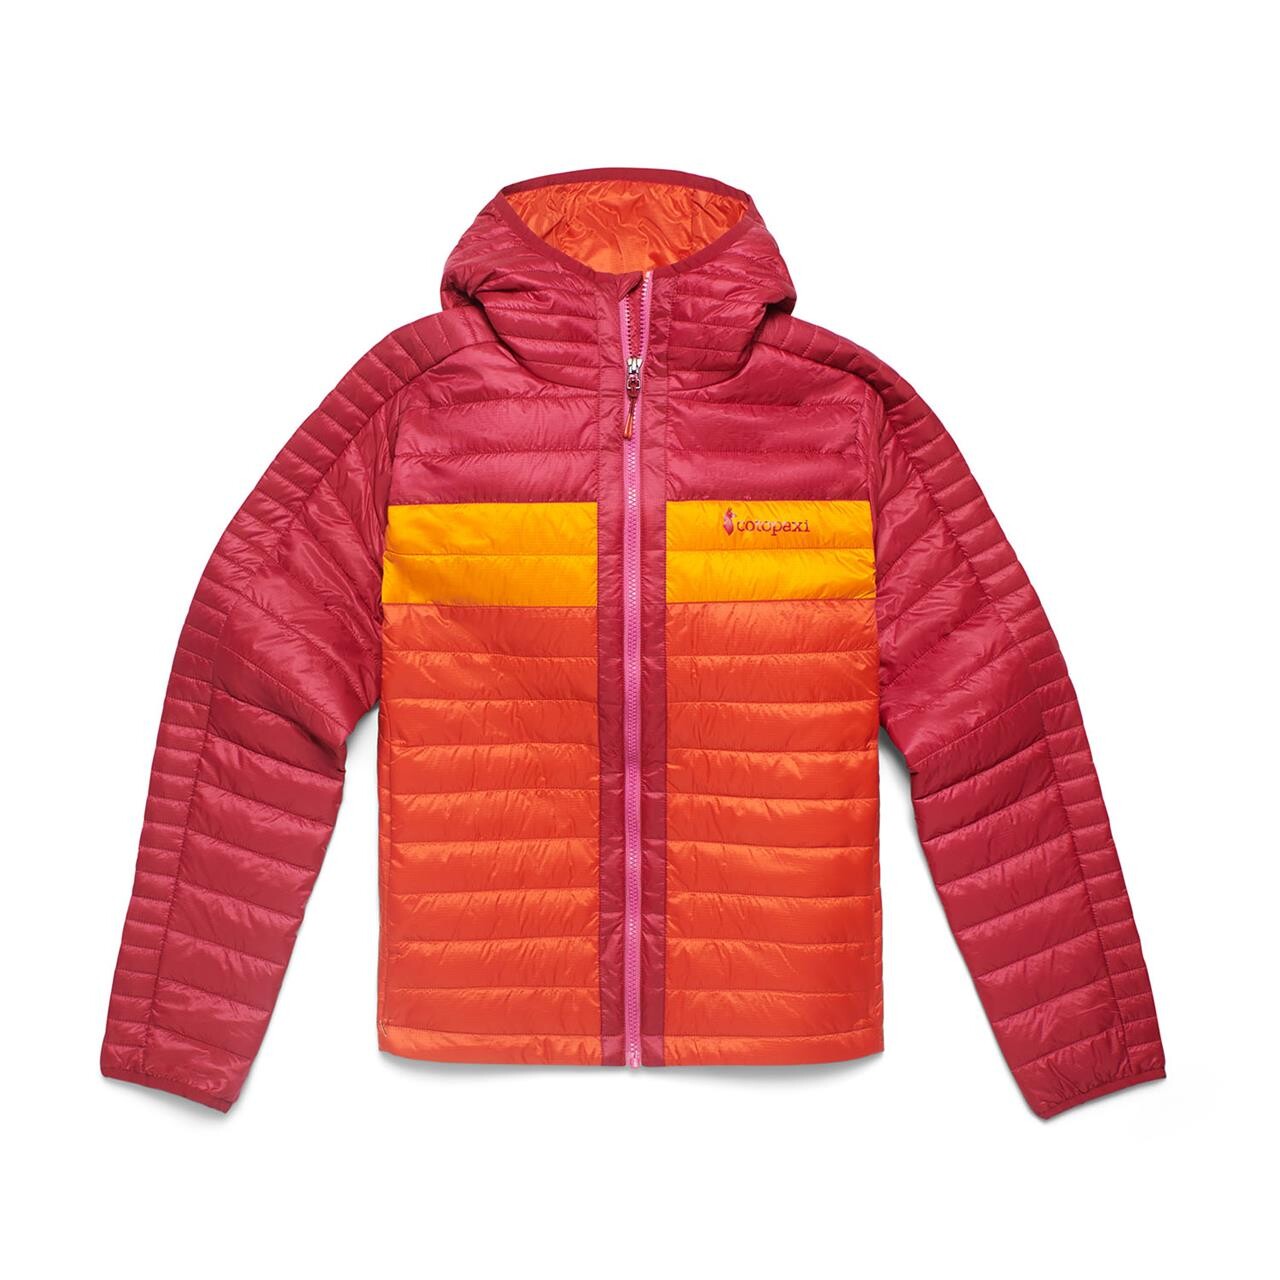 Se Cotopaxi Womens Capa Insulated Hooded Jacket (Rød (RASPBERRY & CANYON) X-small) hos Friluftsland.dk